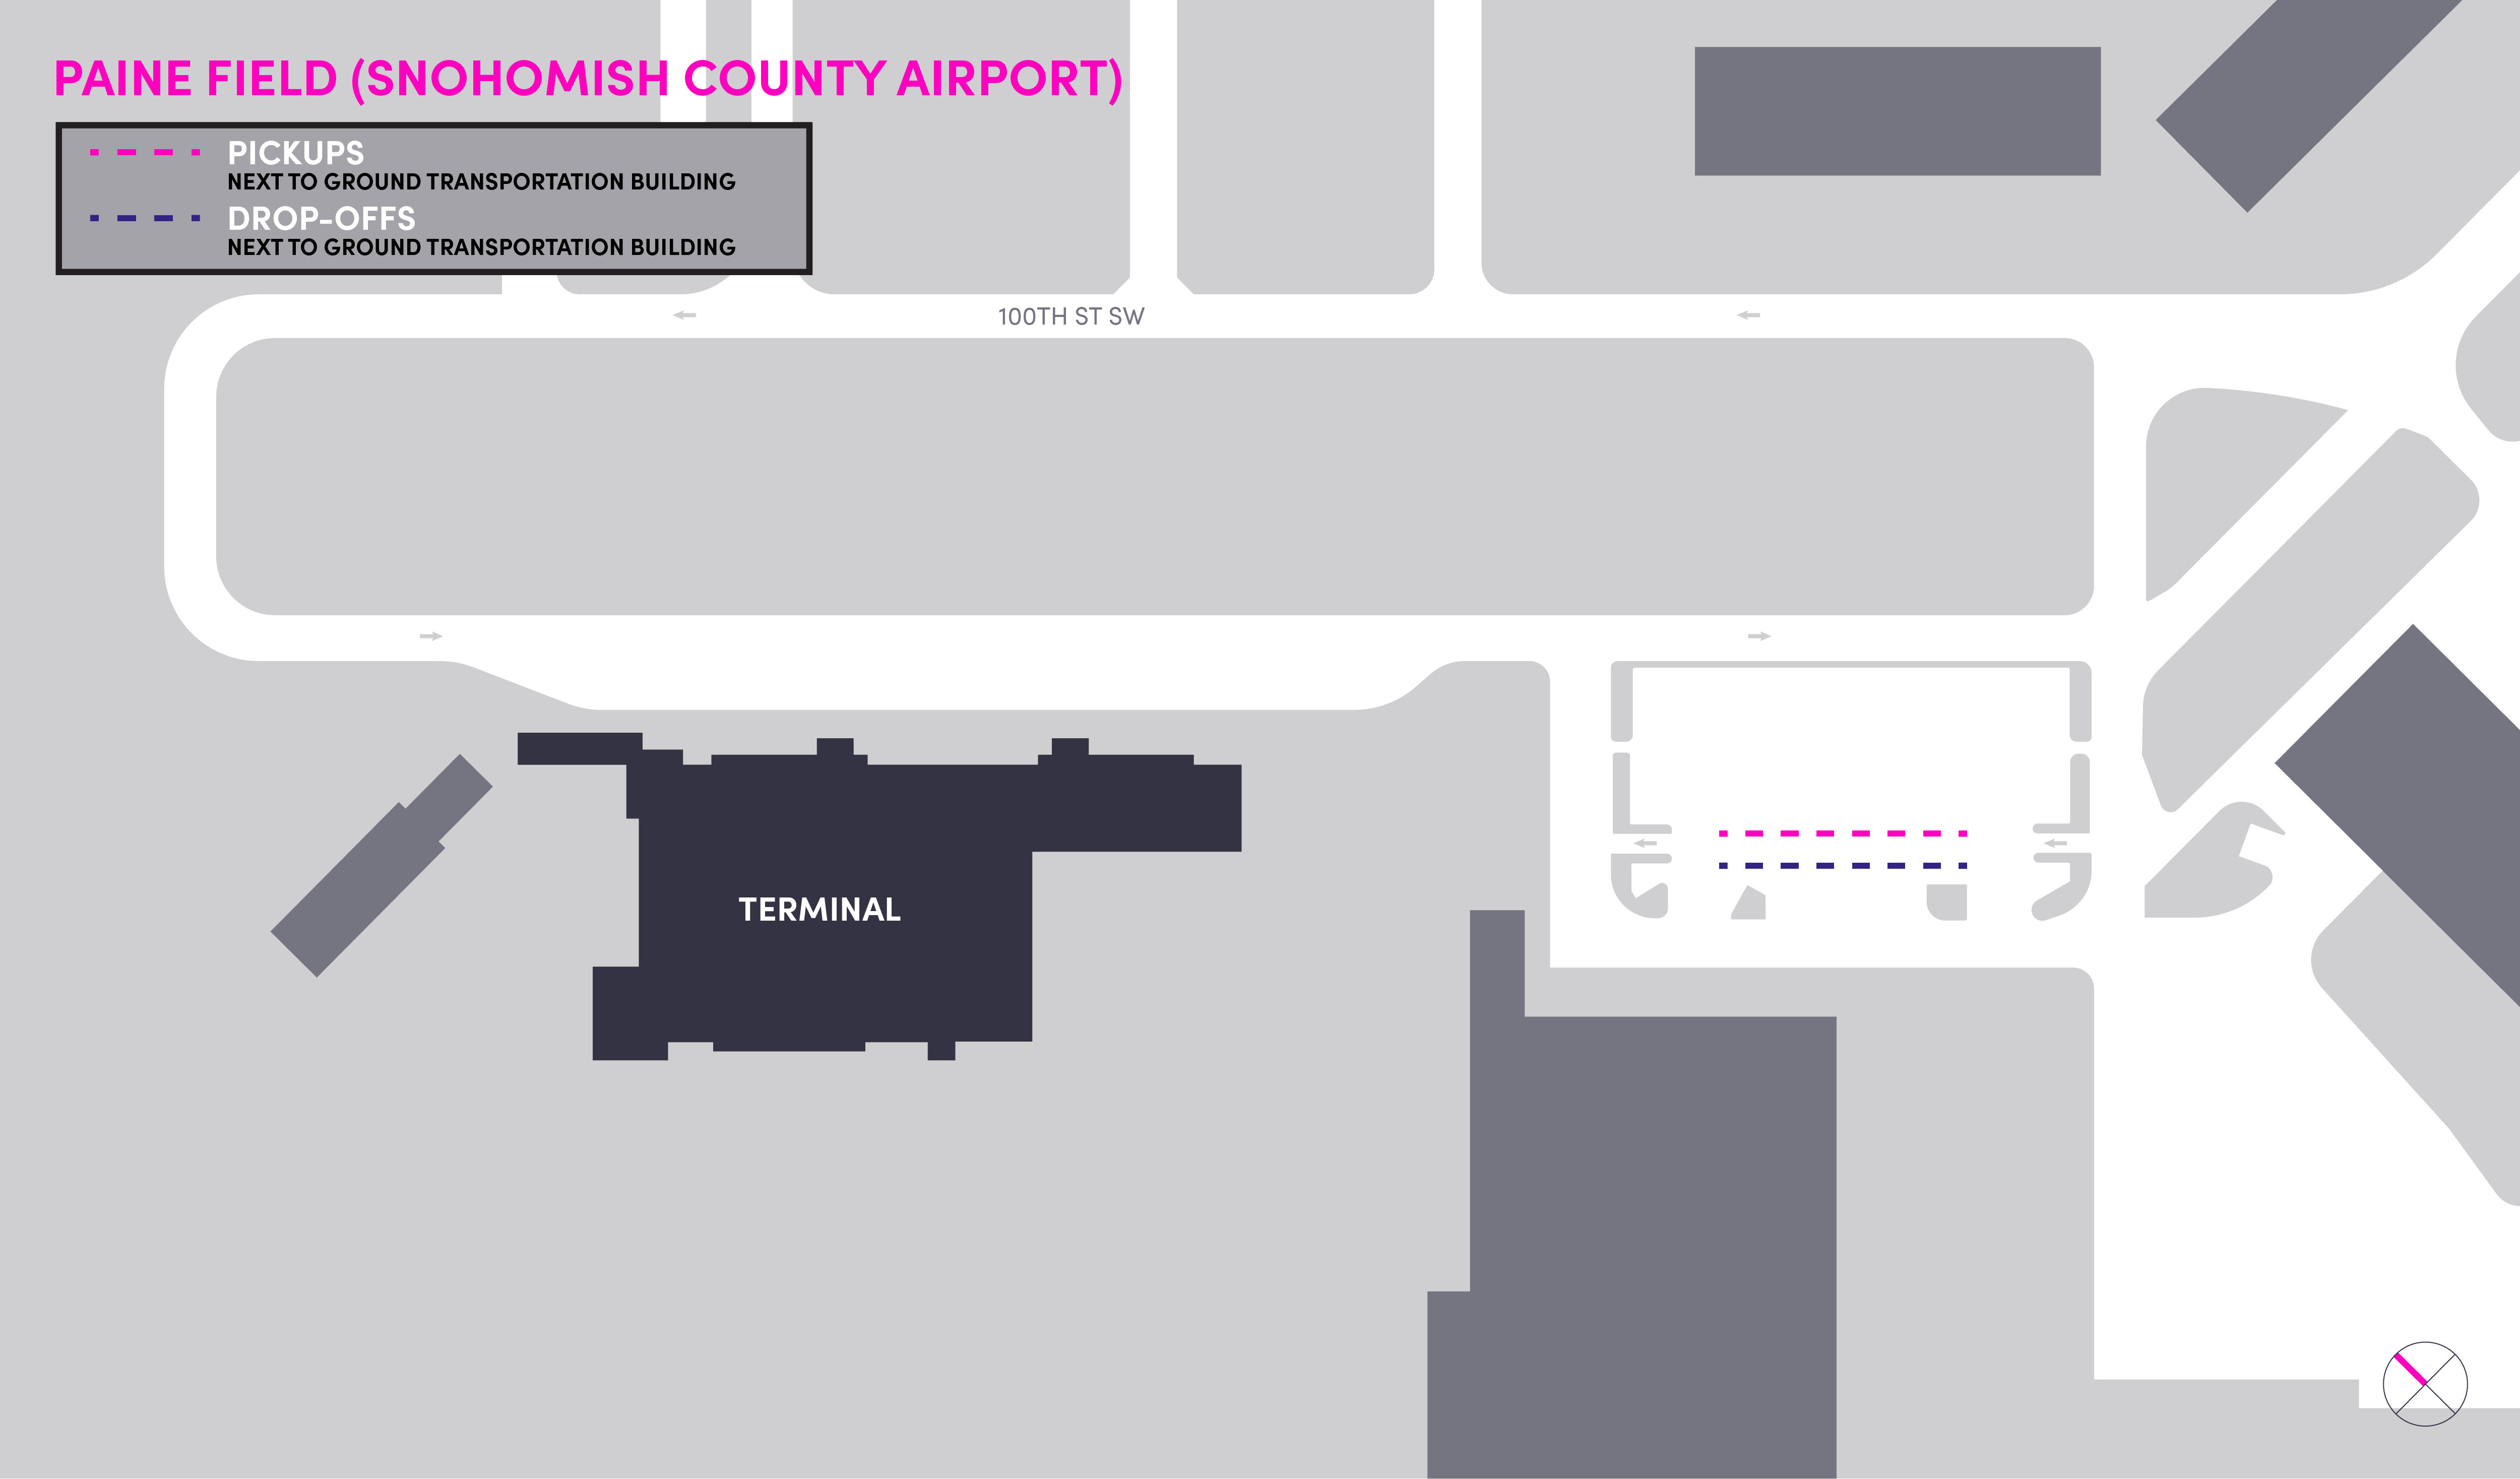 Map of Paine Field Snohomish County Airport